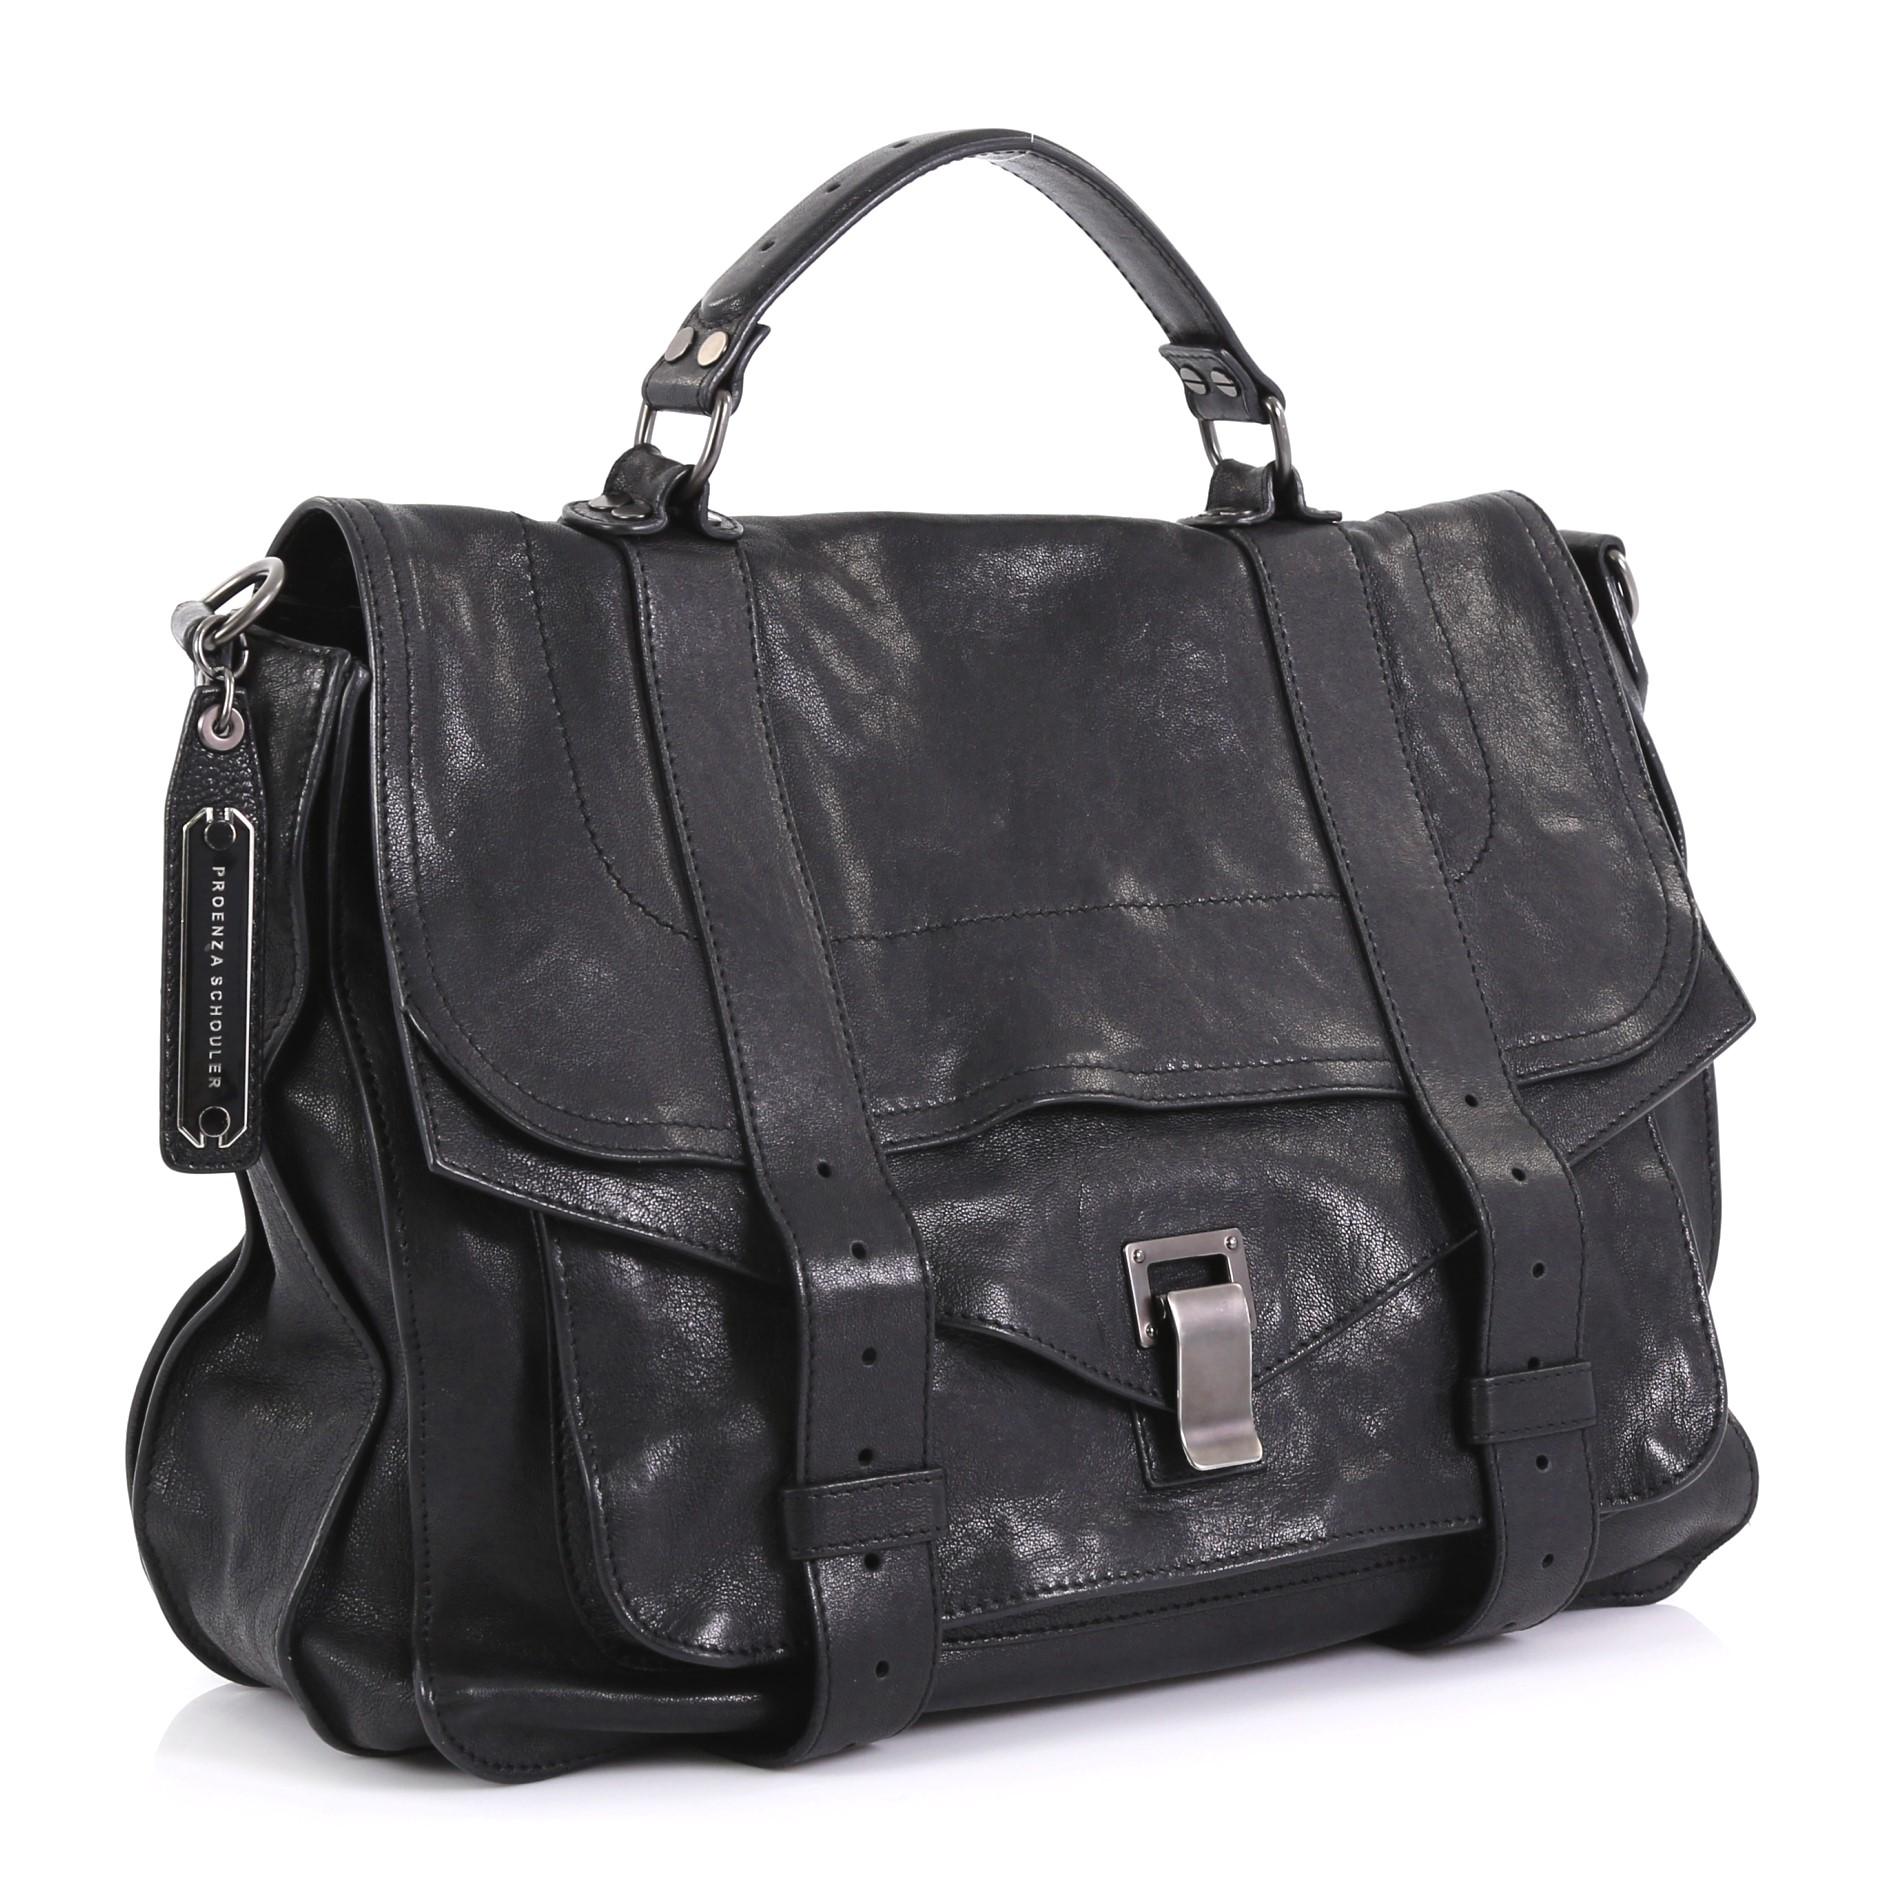 This Proenza Schouler PS1 Satchel Leather Large, crafted in black leather, features a leather top handle, exterior back zip pocket, and matte gunmetal-tone hardware. Its flip-clasp closure opens to a black fabric interior with zip pocket.